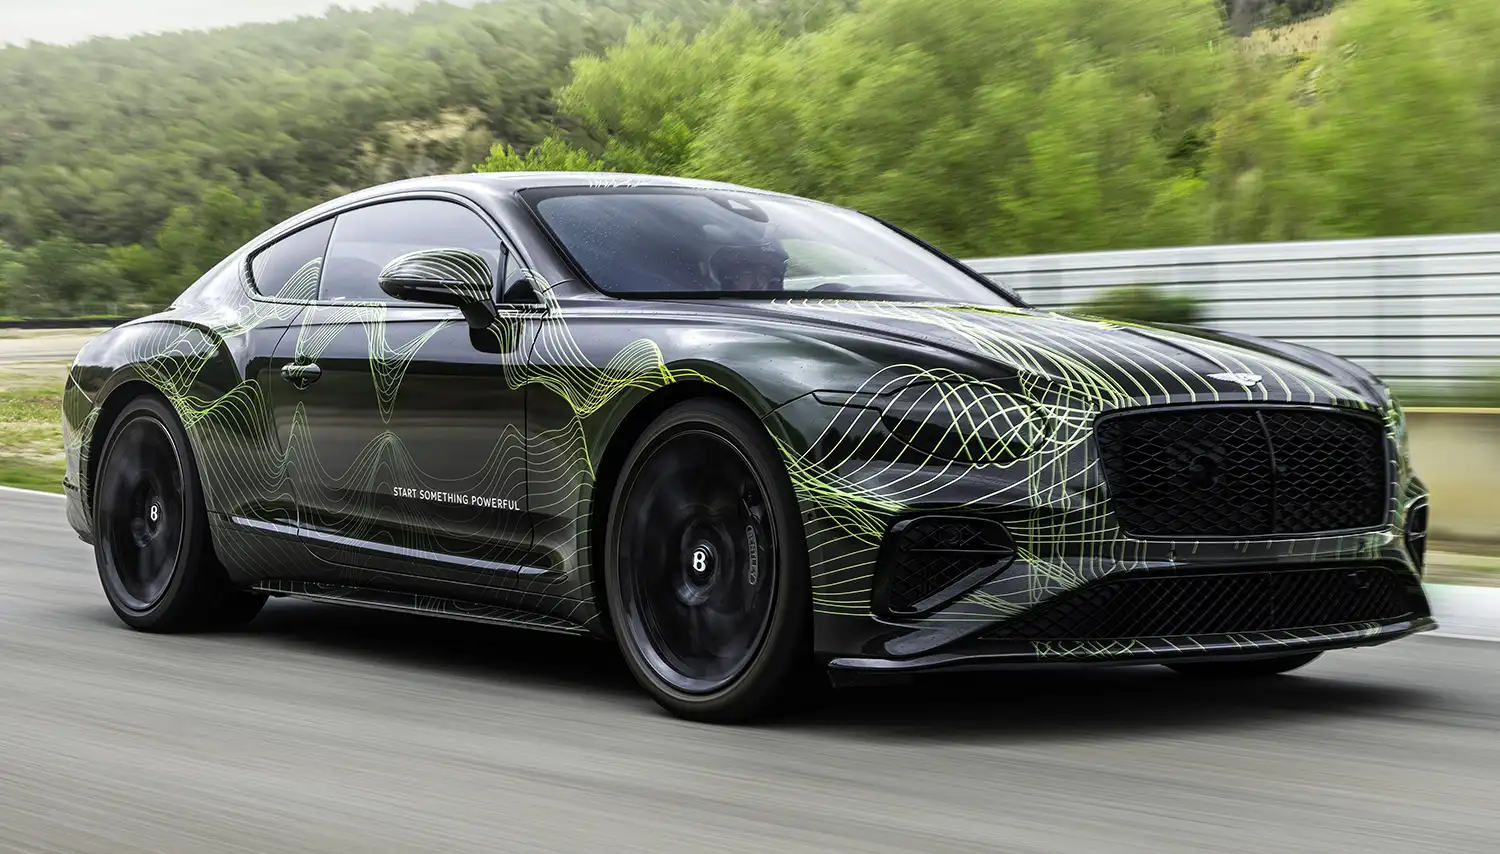 The new Bentley Continental GT is coming